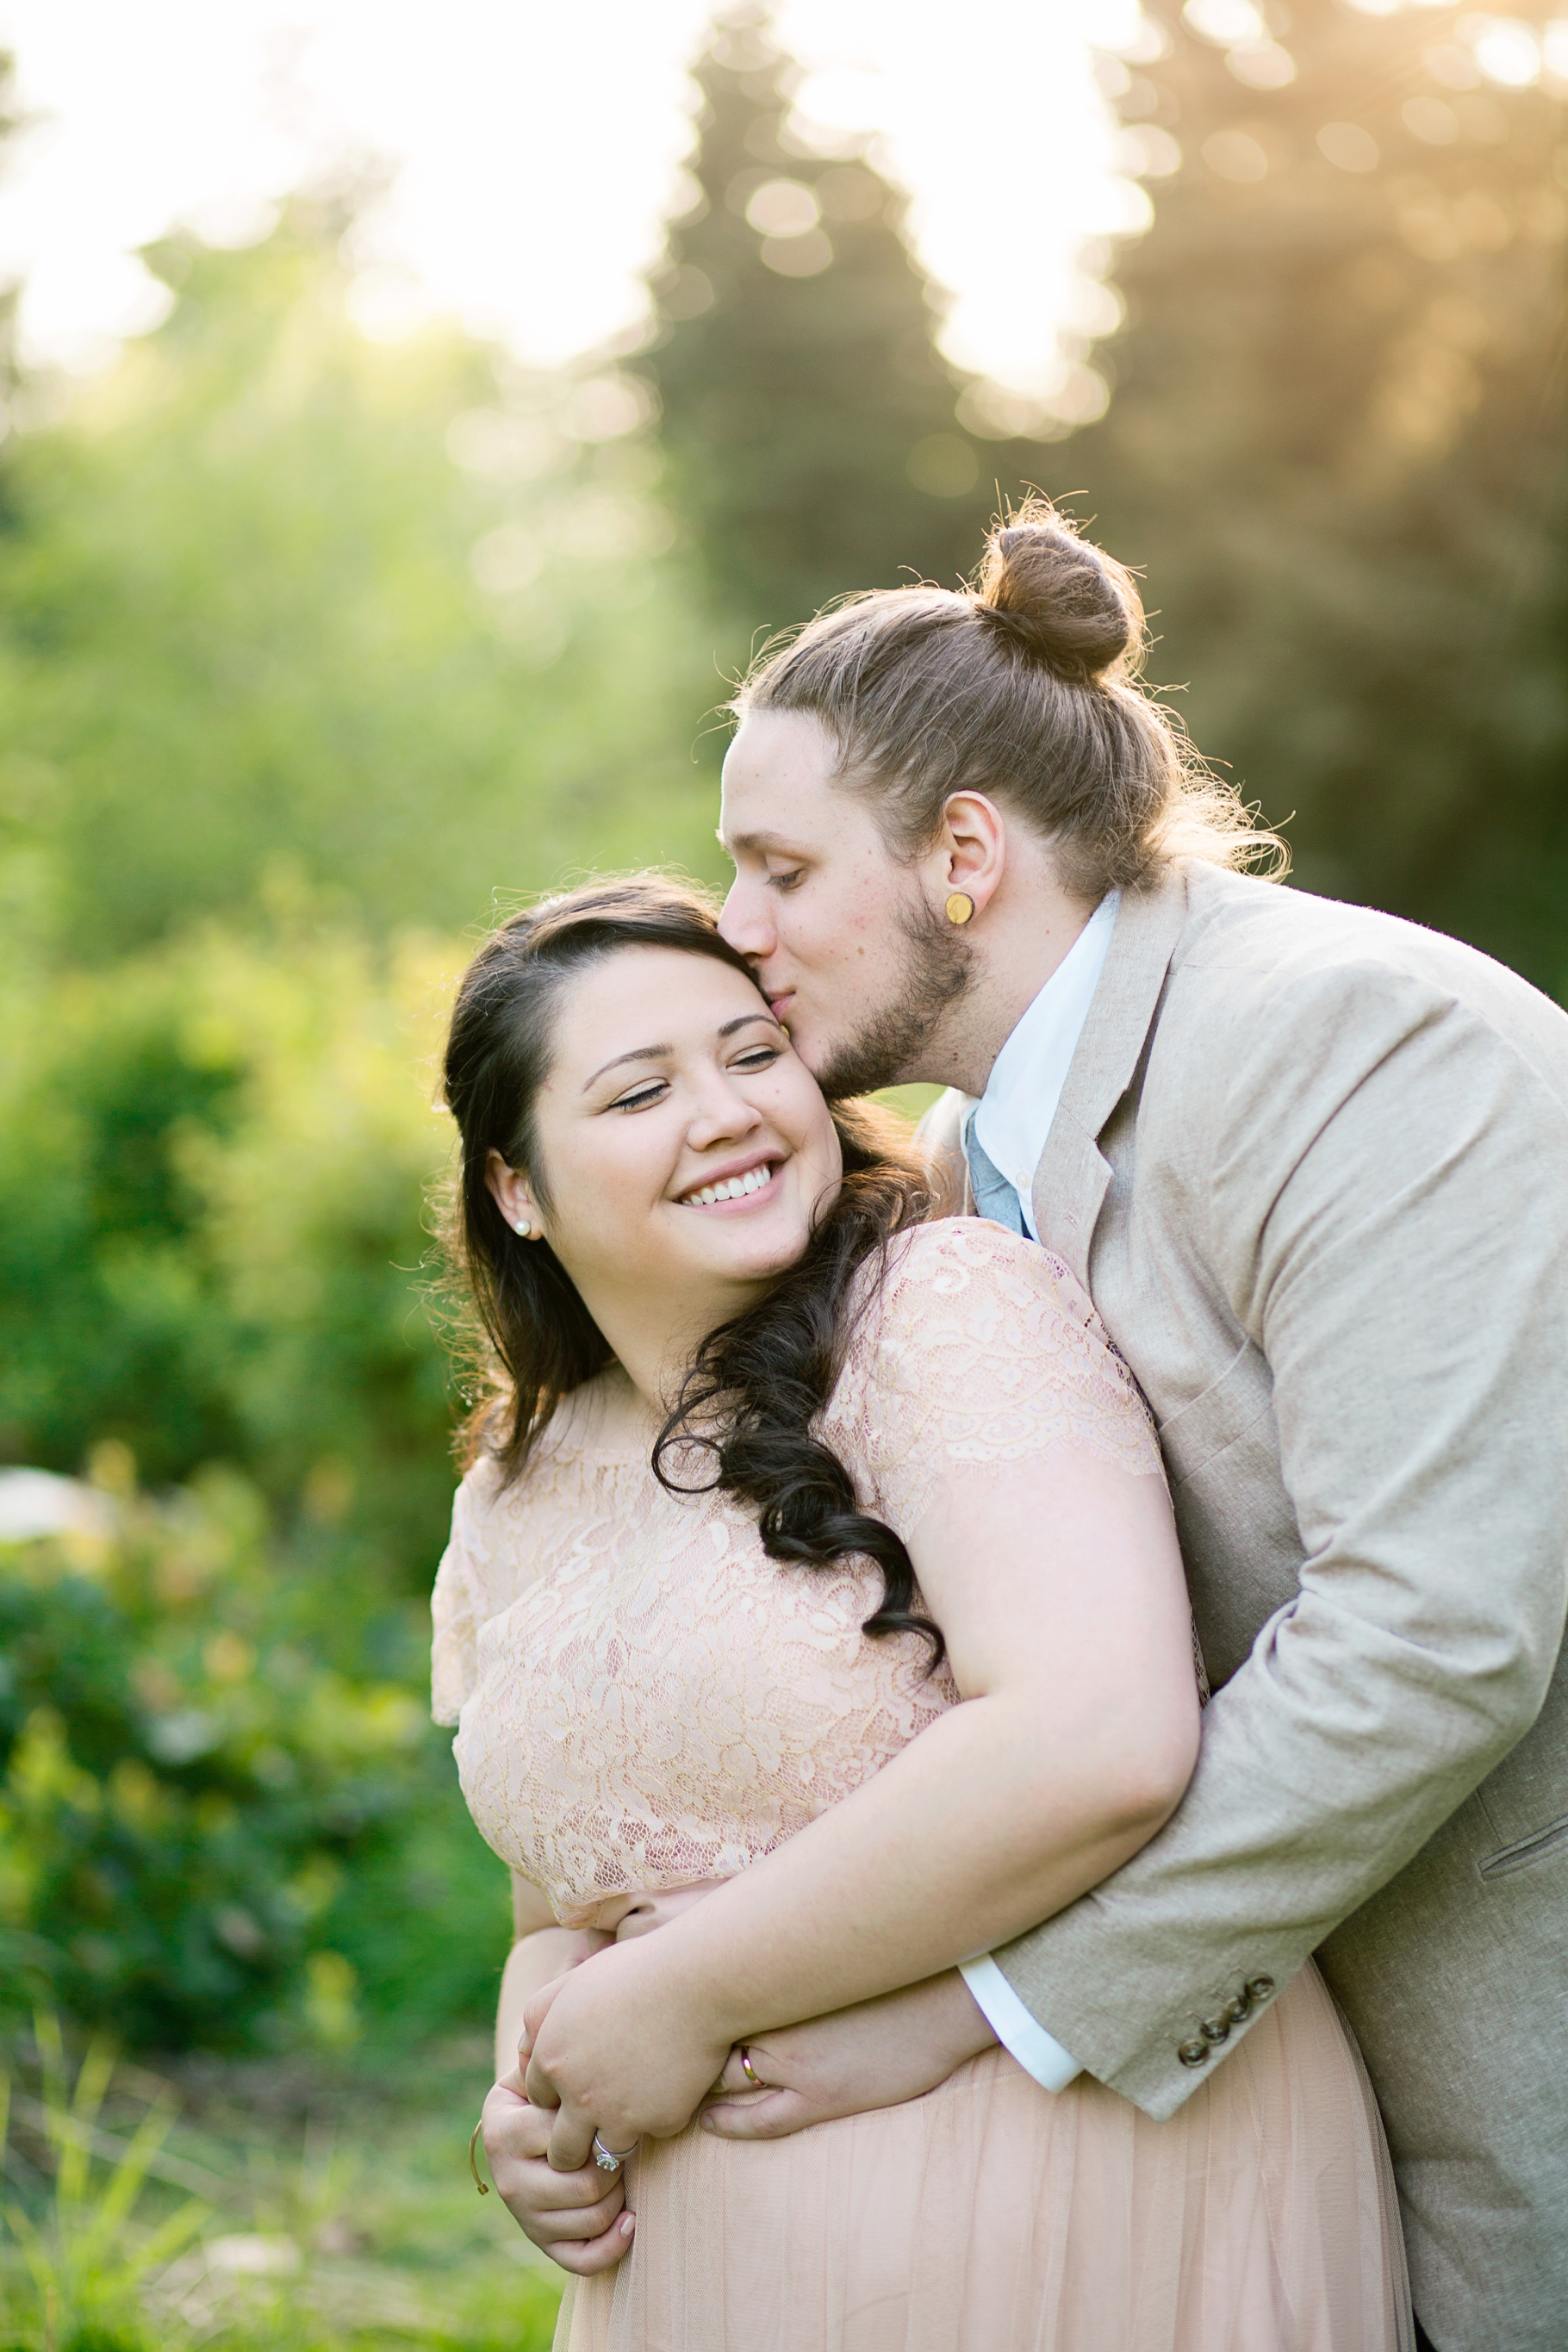 21-Bride-Groom-Portraits-Married-Discovery-Park-Elopement-Seattle-Photographer-Wedding-Photography-by-Betty-Elaine